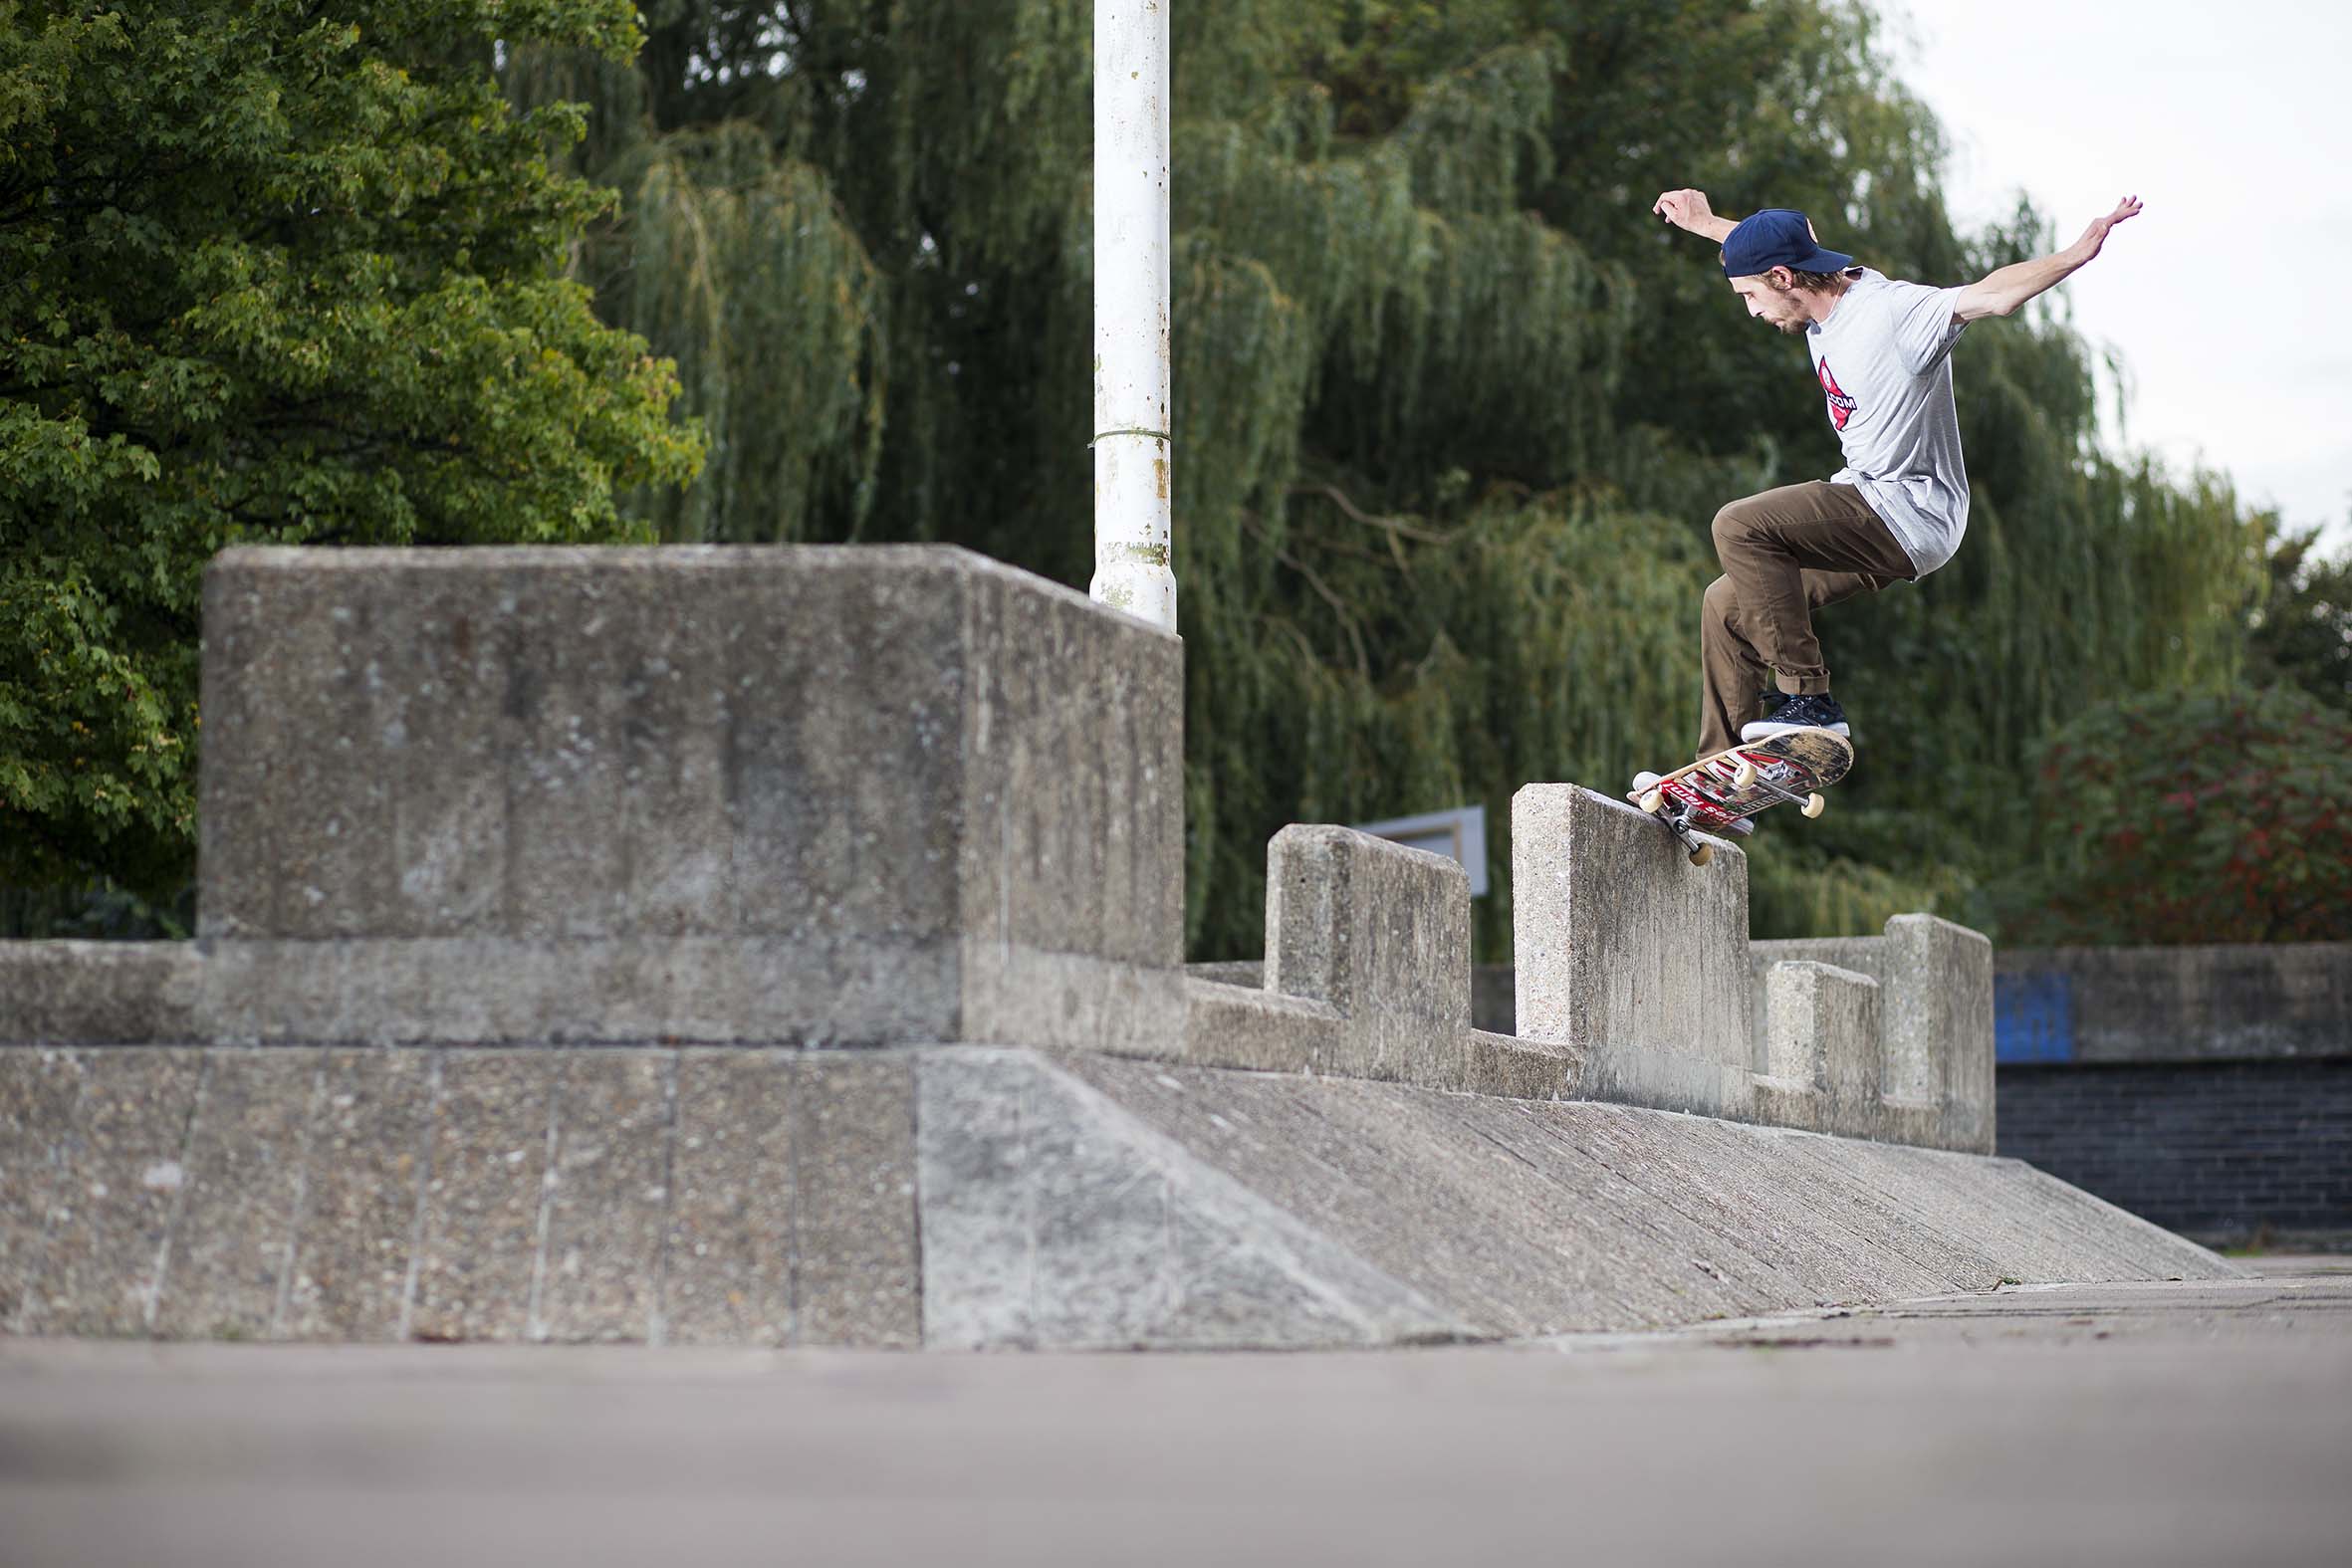 Harry Lintell - frontside crook to fakie